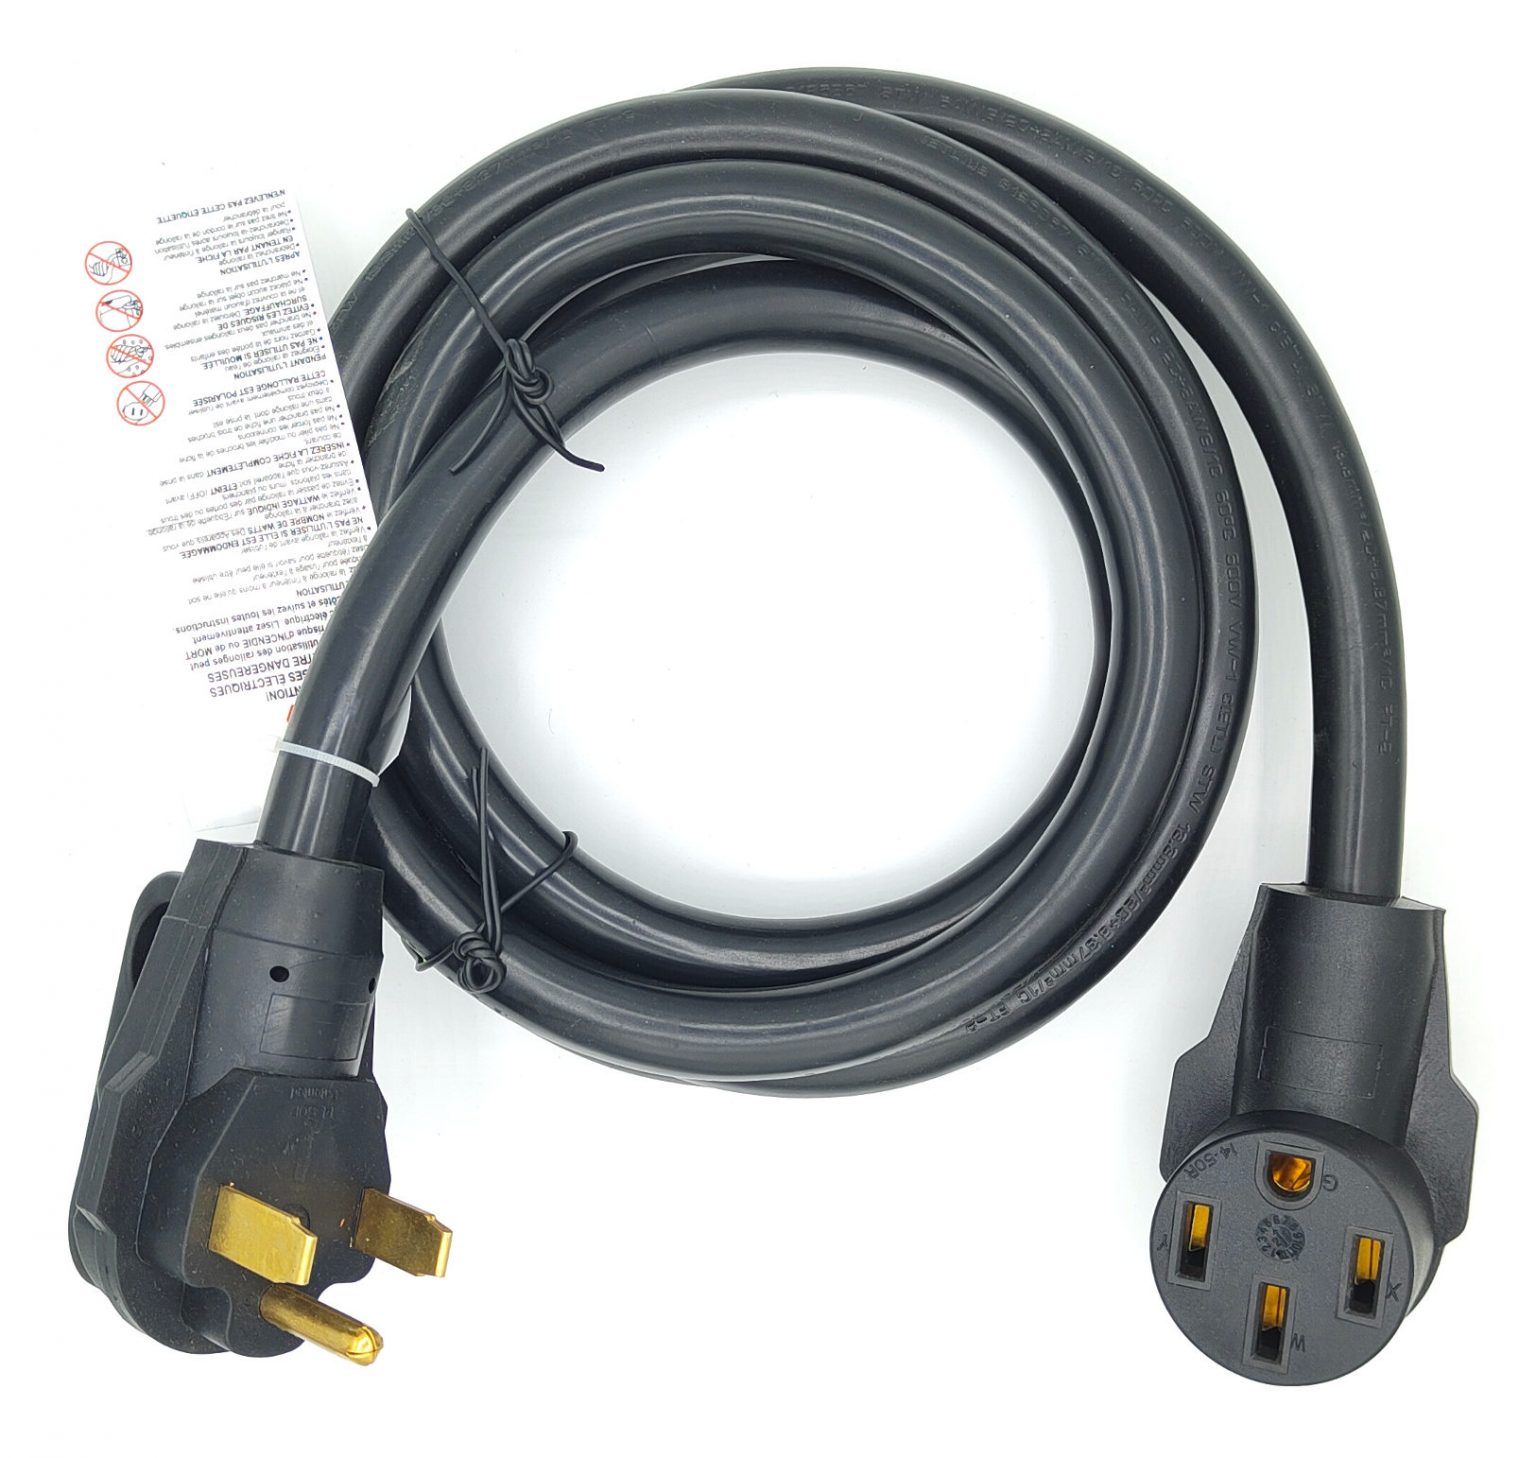 NEMA 1450 Extension Cord for electric vehicle only, 10 ft. EVSE Adapters